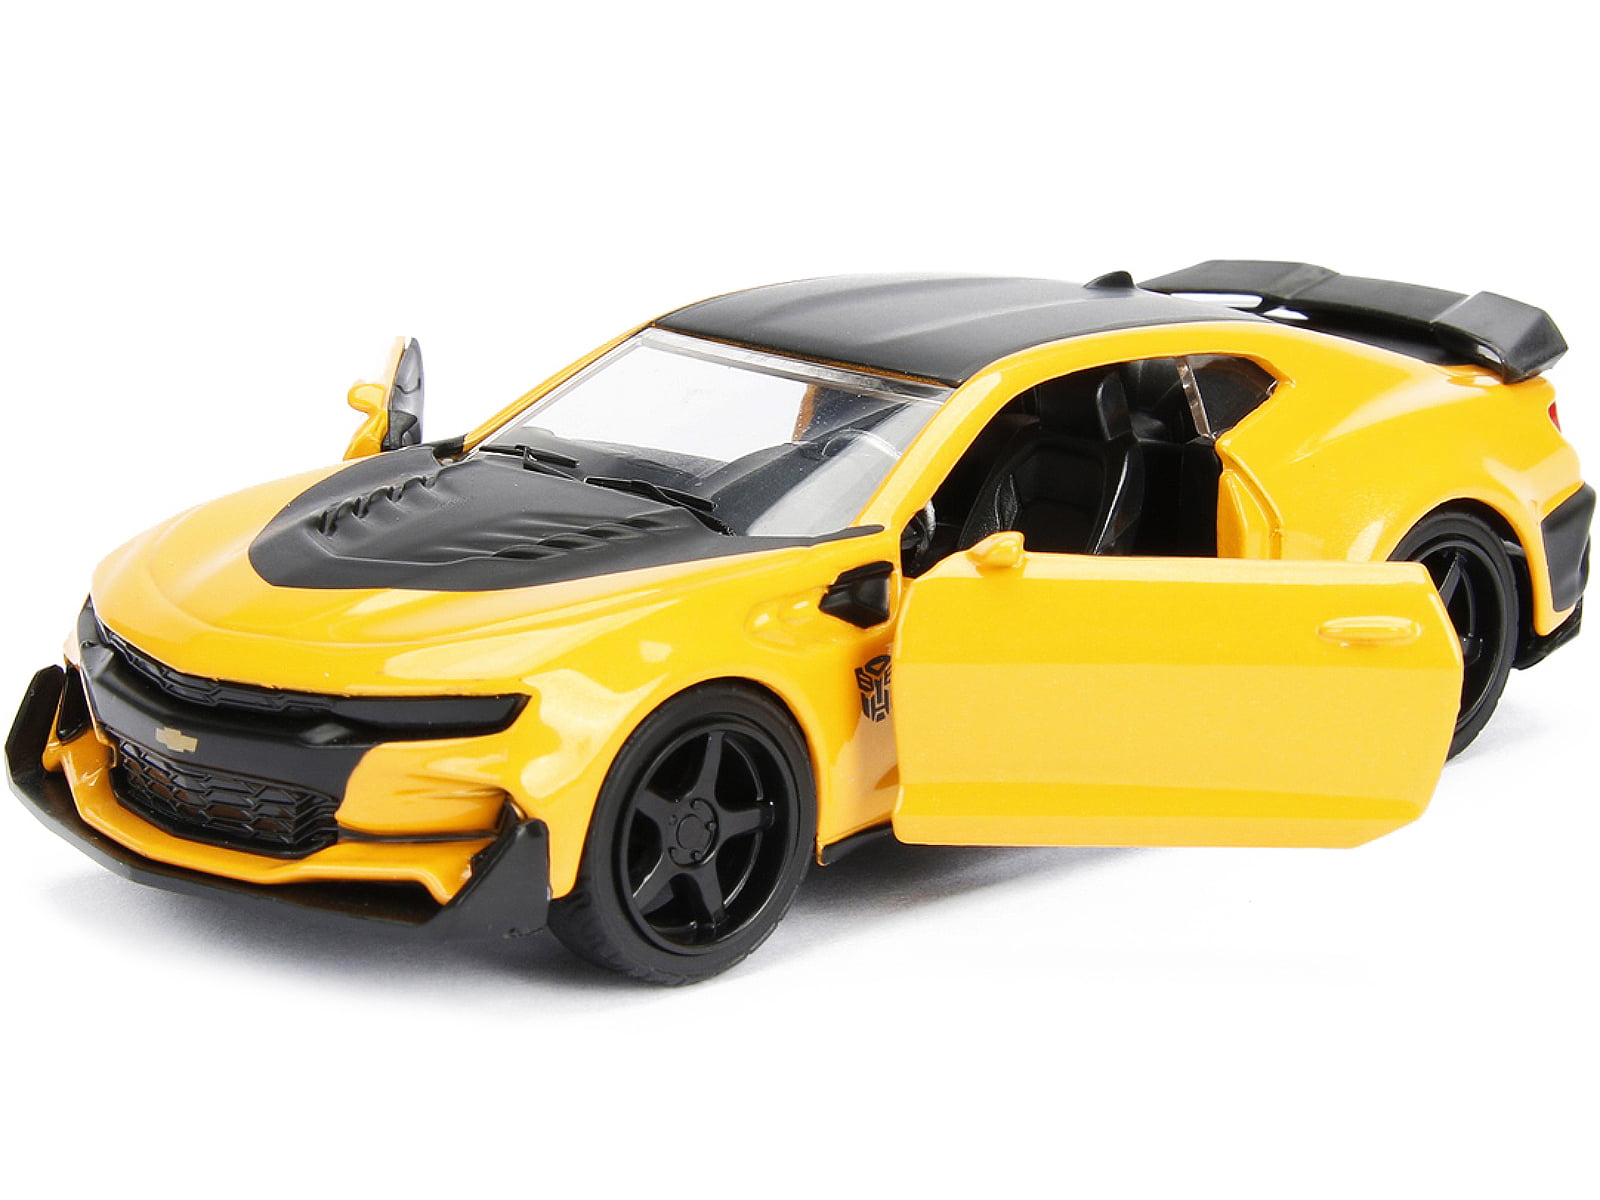 1:32 Chevrolet Camaro Bumblebee Car Model Alloy Diecast Toy Vehicle Yellow Gift 